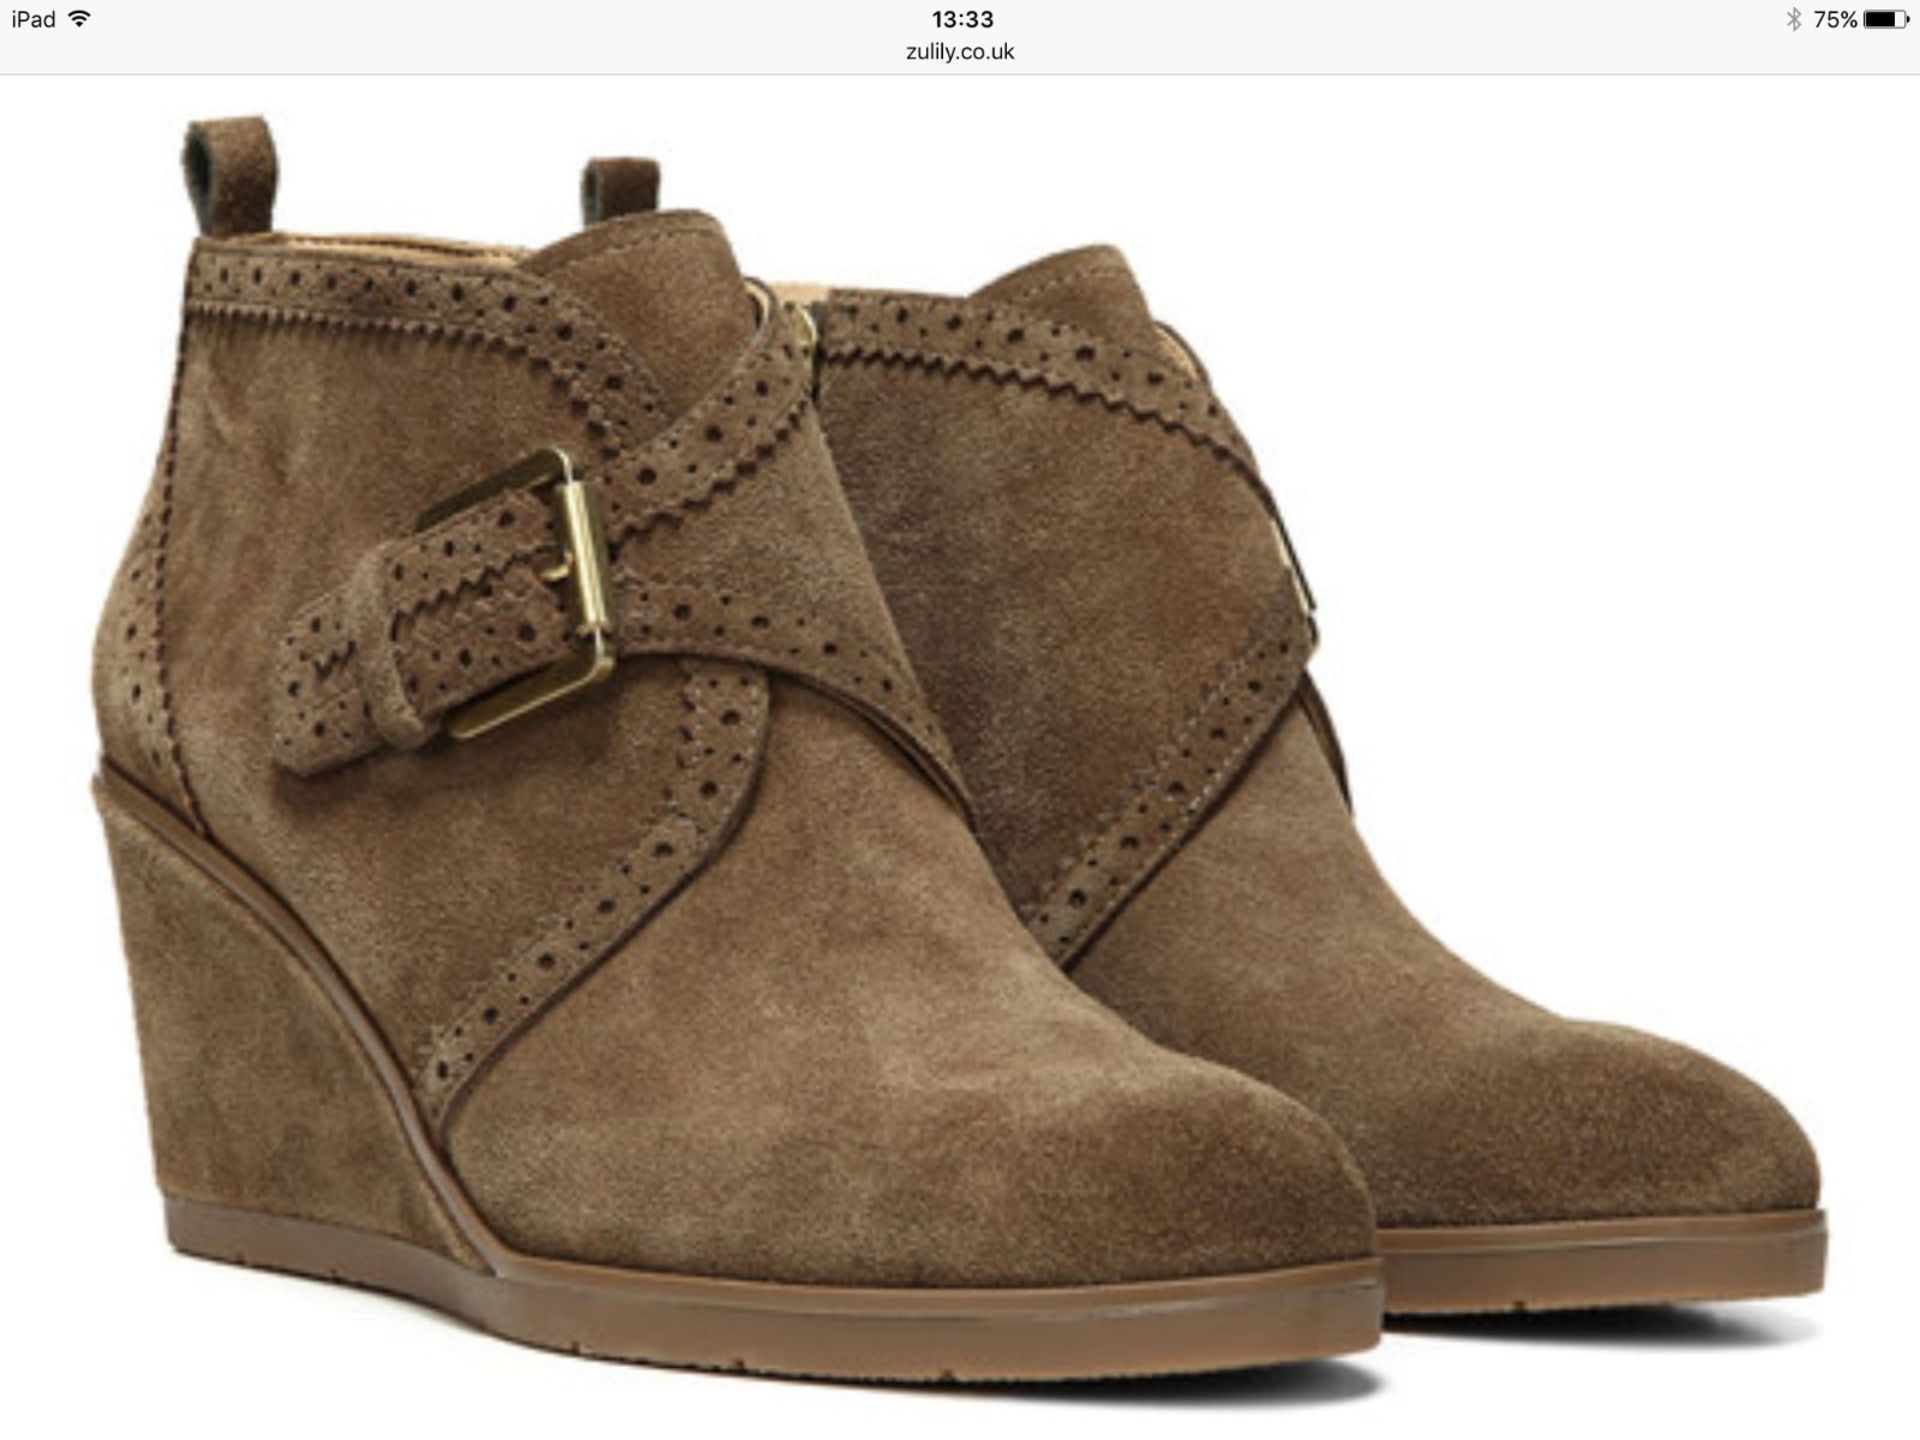 Franco Sarto Desert Khaki Arielle Suede Wedge Bootie, Size UK 6, RRP £151.99 (New with box) - Image 2 of 8